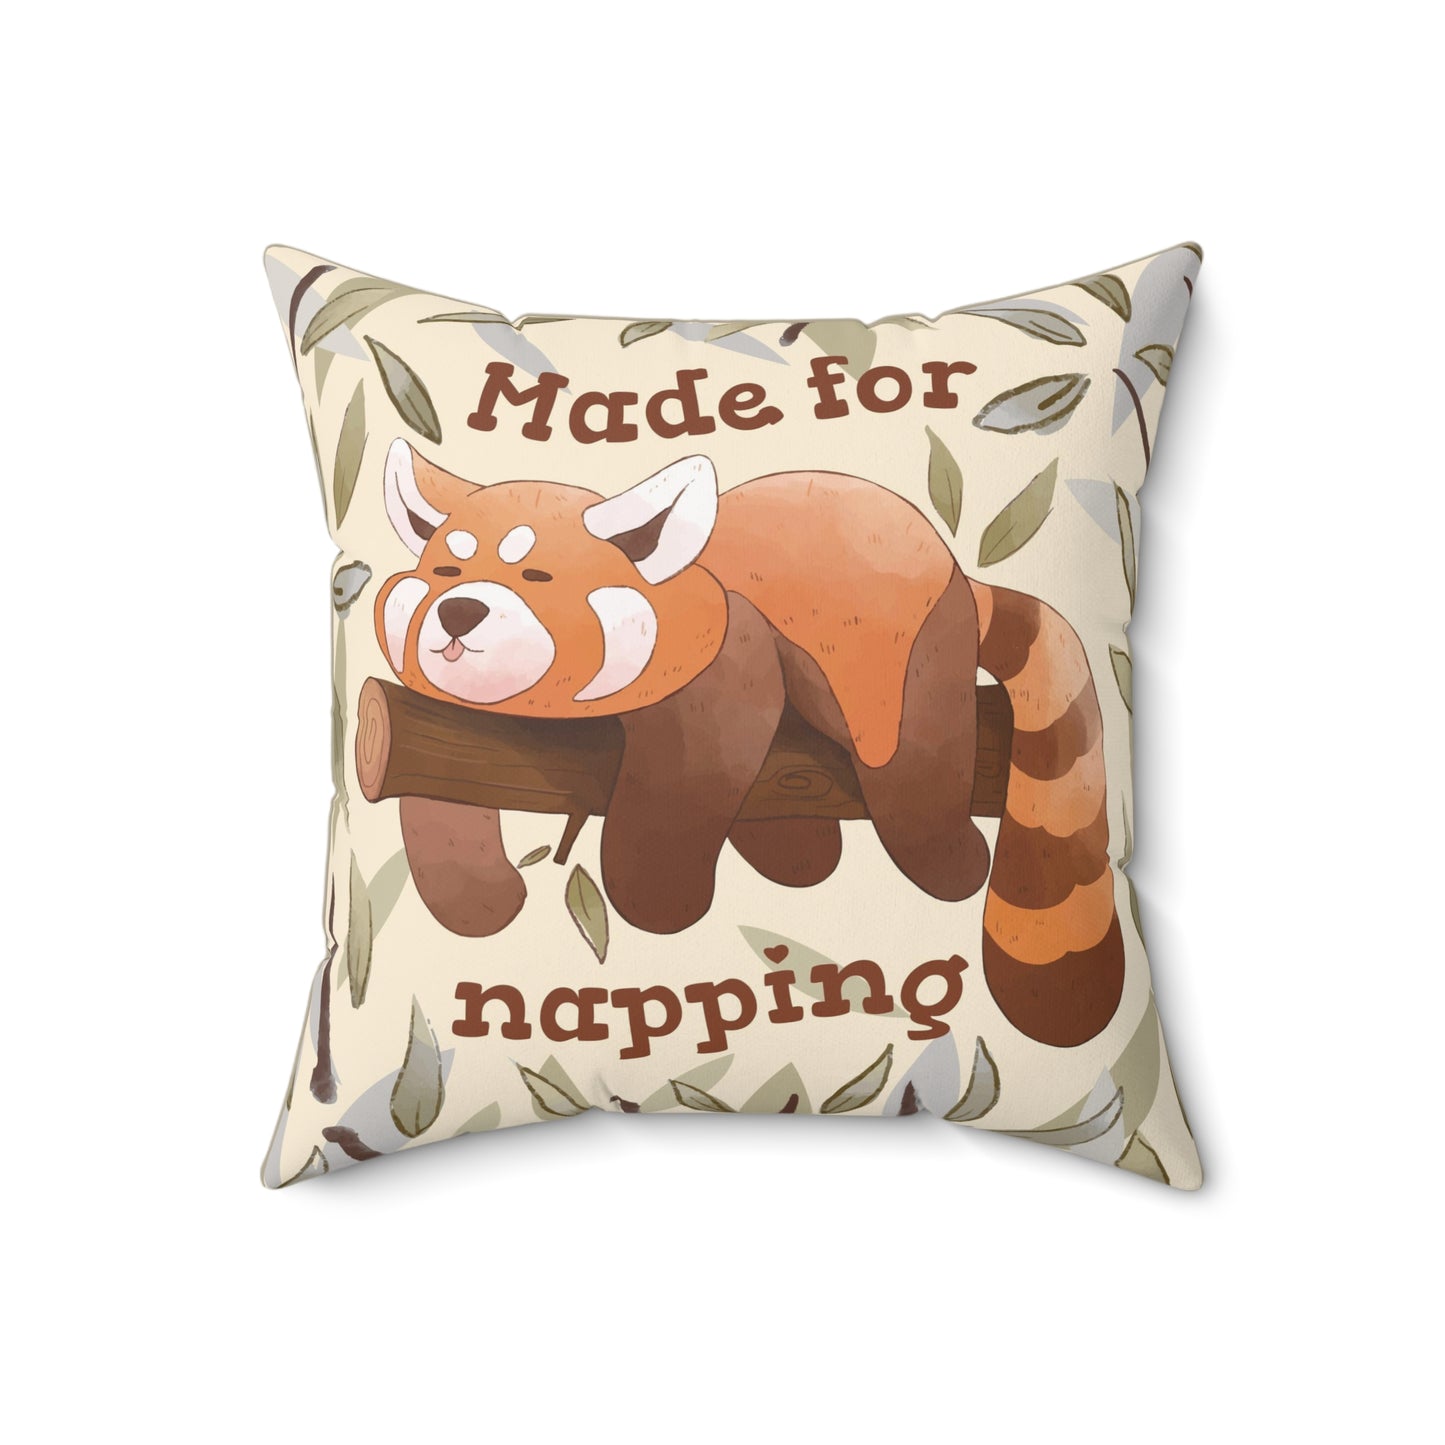 Red Panda - Made for Napping Square Pillow